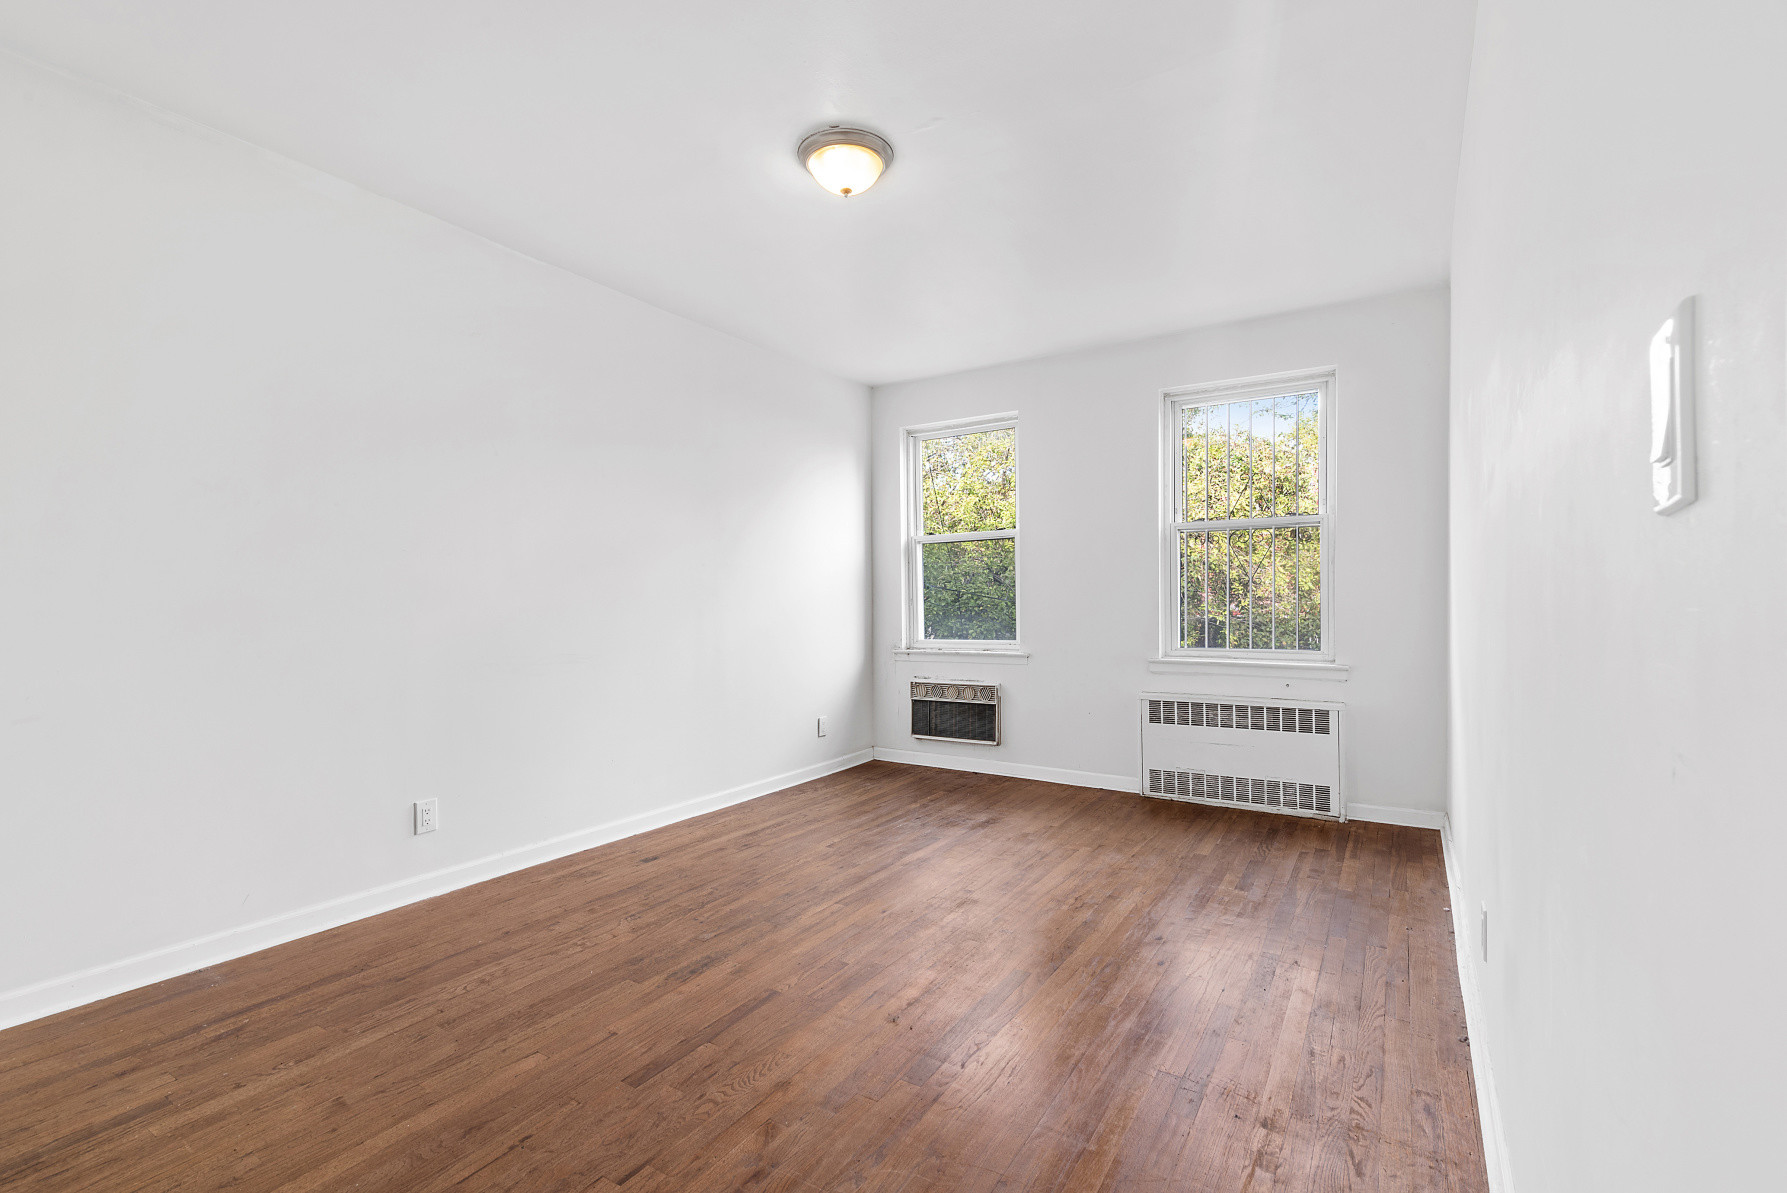 hardwood flooring queens ny of laquana mcneil real estate agent in new york city compass within 986b78a75b725095ac693dbfe6abc63c49abdc3e